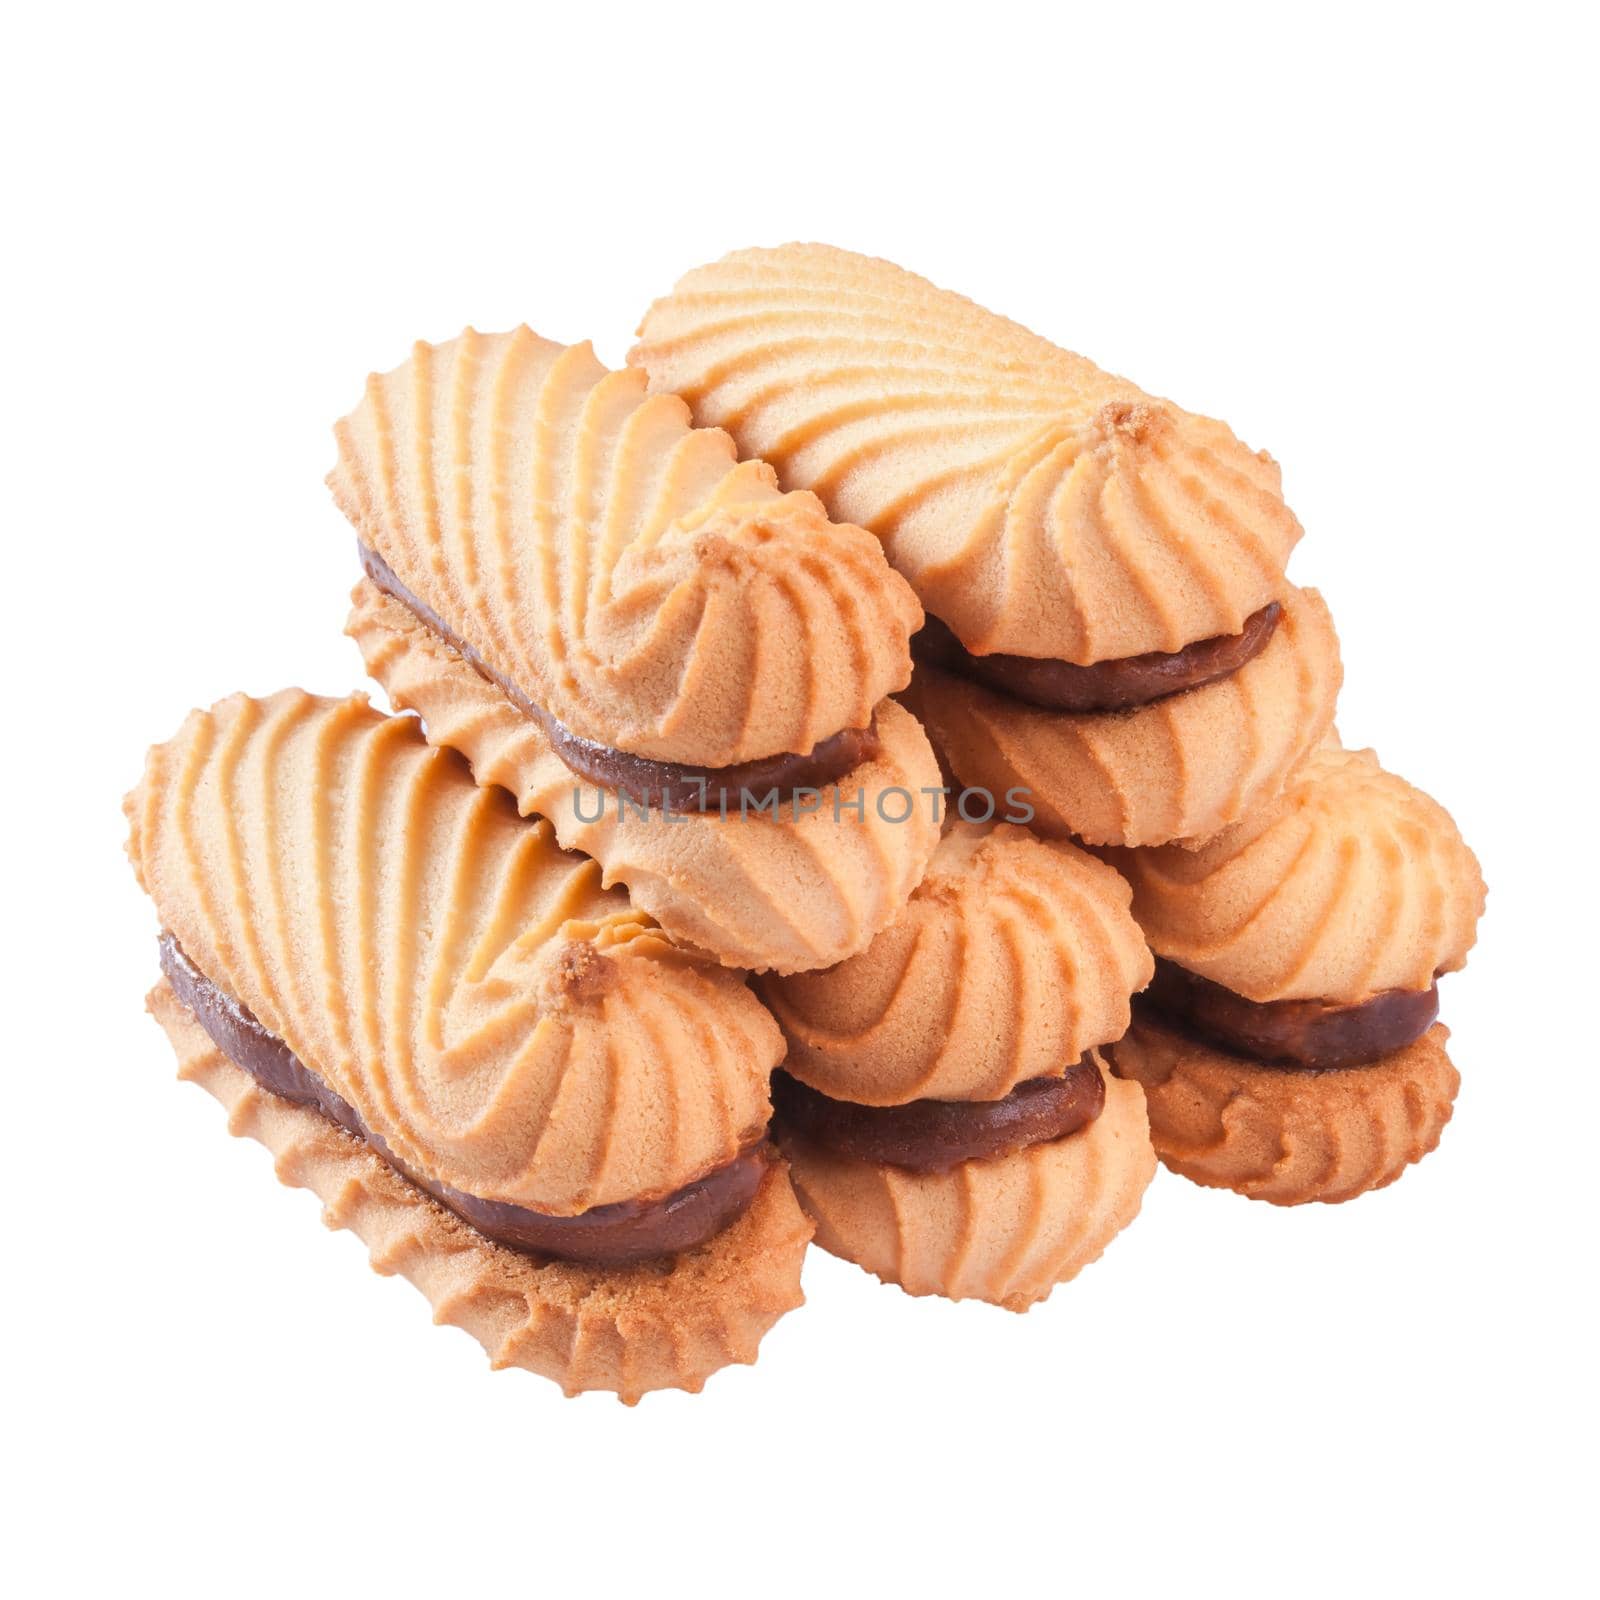 Stack of appetizing crunchy shortbread sandwich cookies stuffed with boiled condensed milk isolated on white background